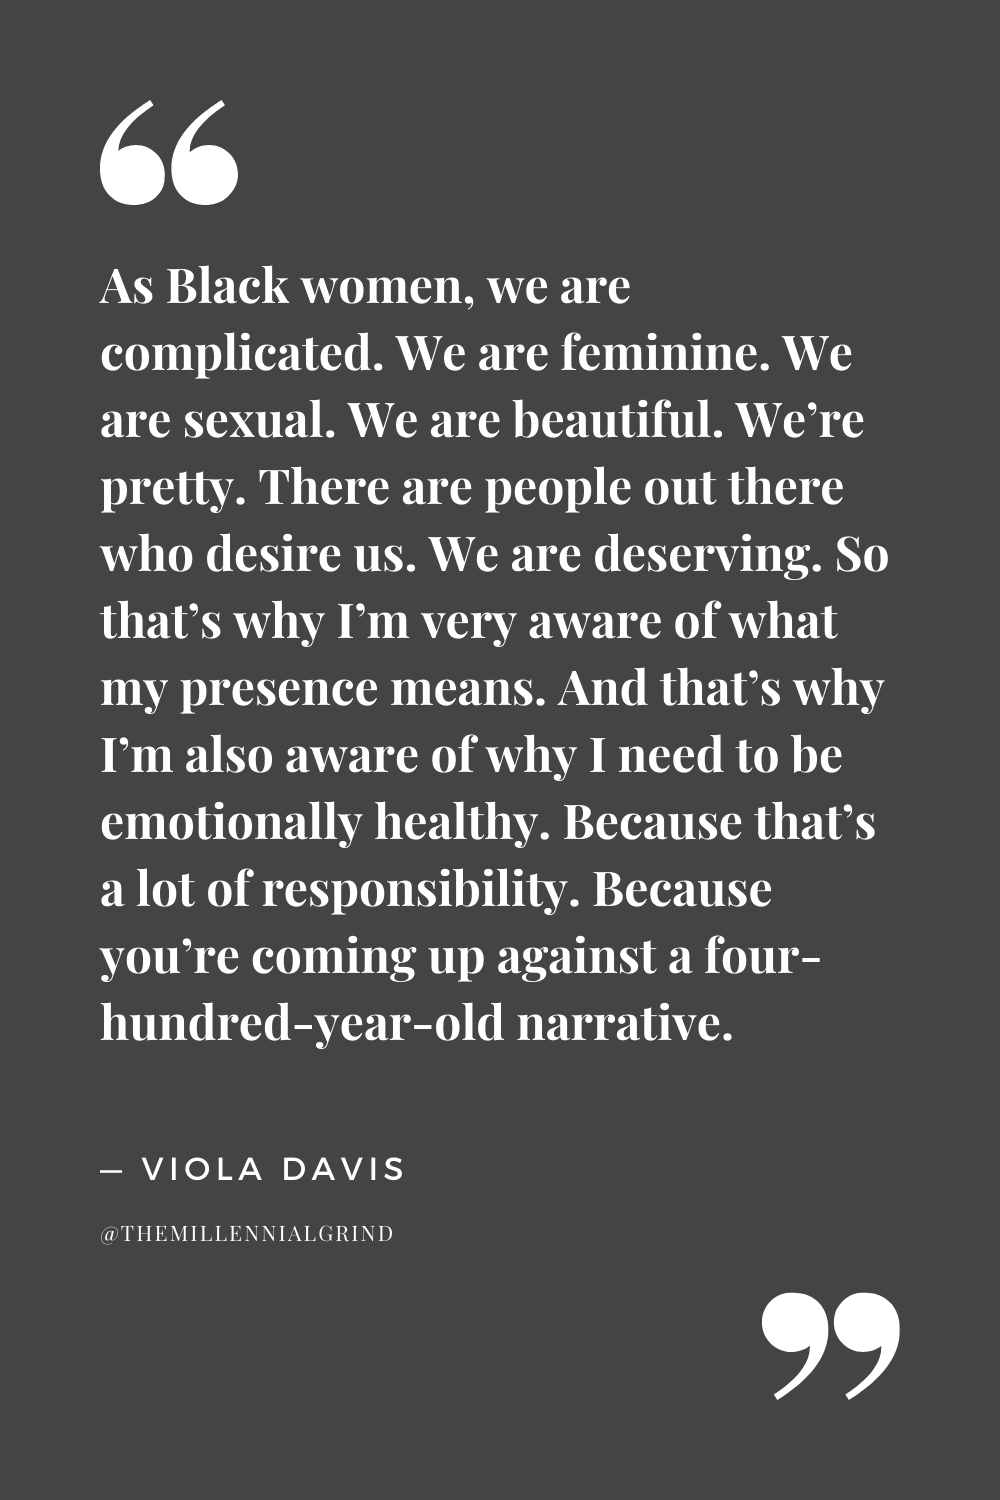 Quotes from Finding Me by Viola Davis